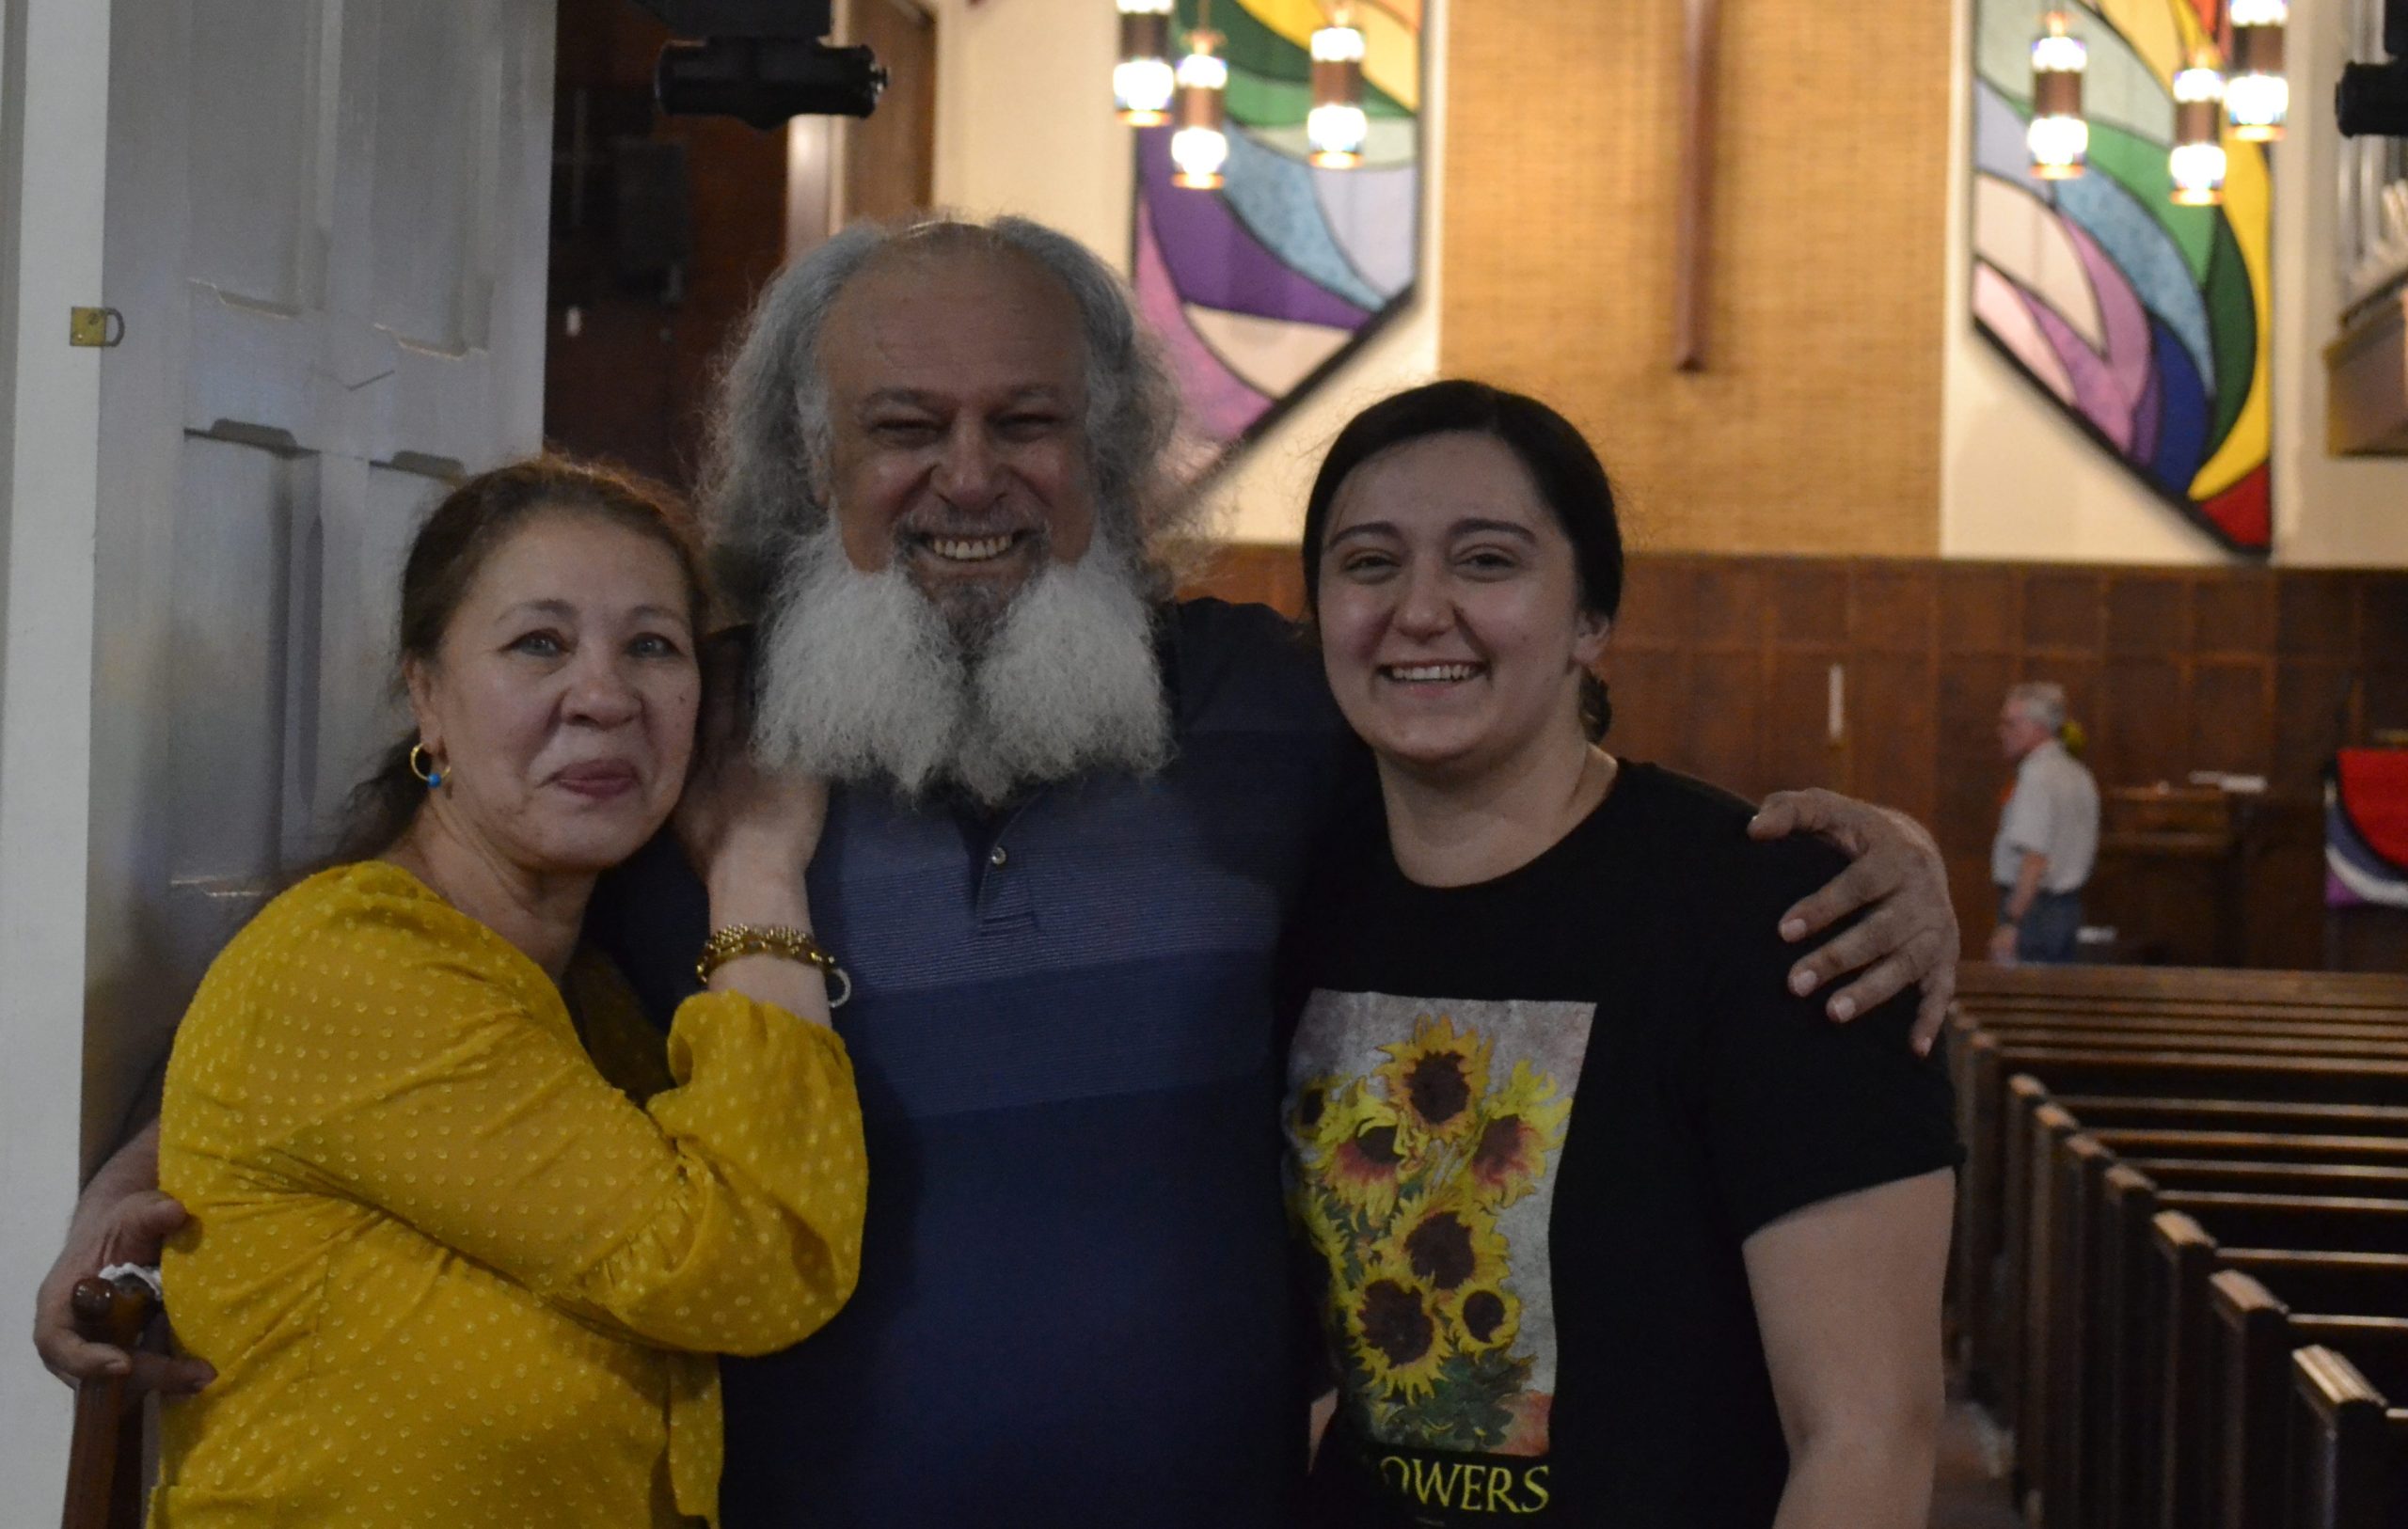 After two years of sanctuary in ABQ church basement, Iraqi refugee can go home